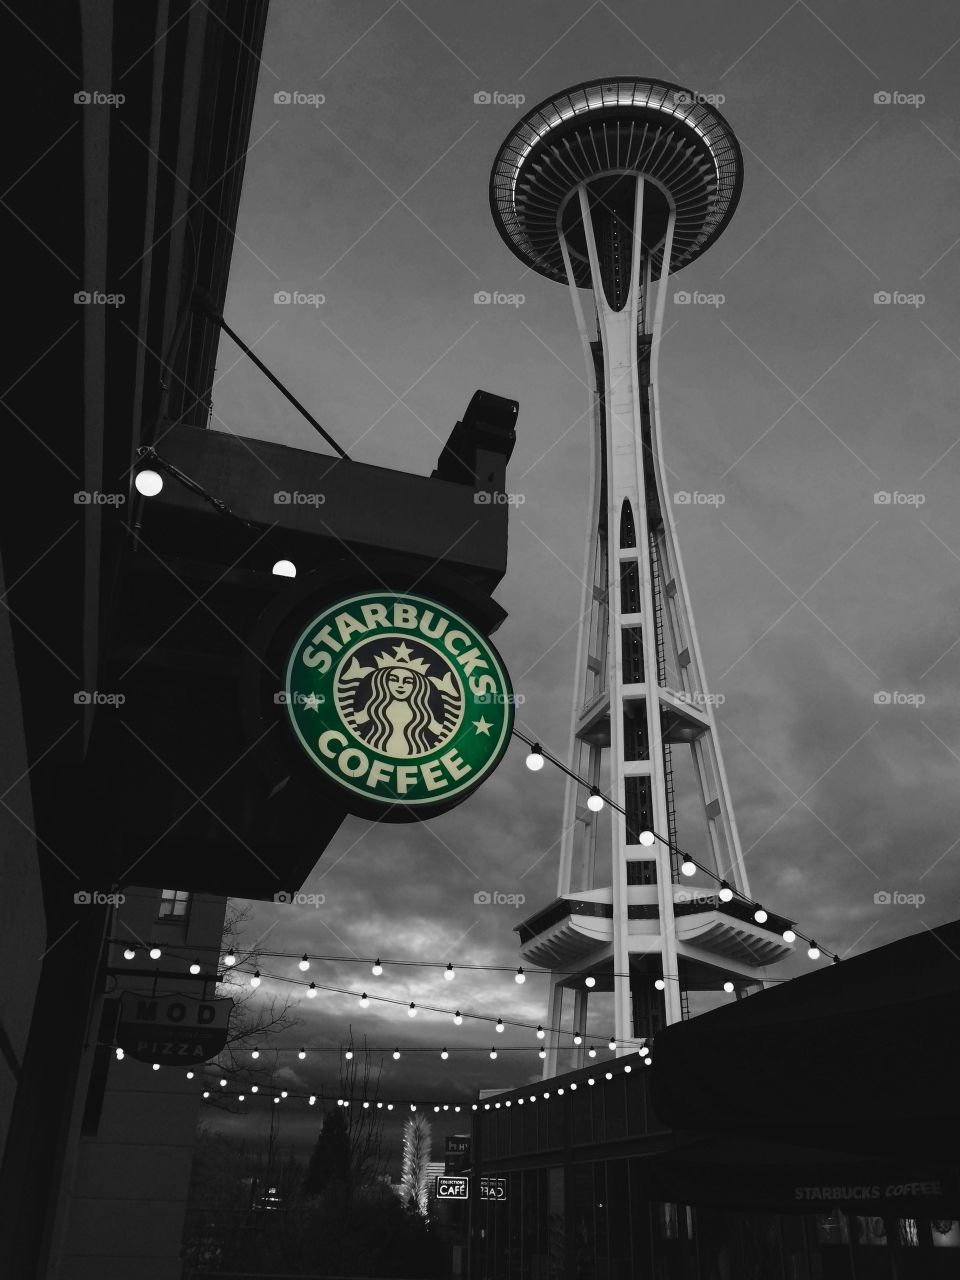 Wanderlust.. The one and only SpaceNeedle in Seattle, Washington. And the well known Starbucks logo with rows and rows of lights